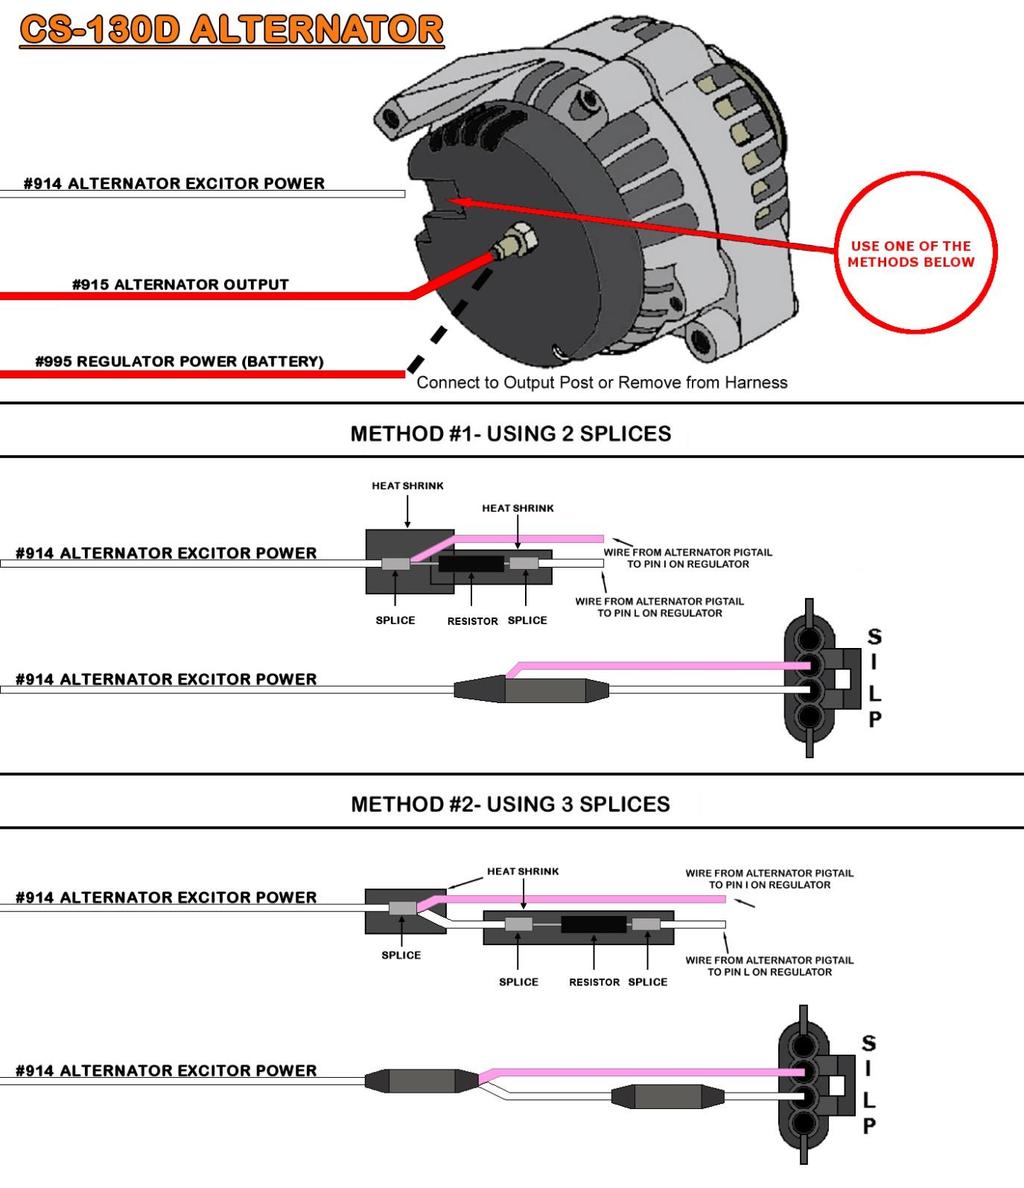 Both diagrams accomplish the same task: they use the WHITE #914 ALTERNATOR EXCITOR POWER wire to provide a switched power source and a resisted power source to